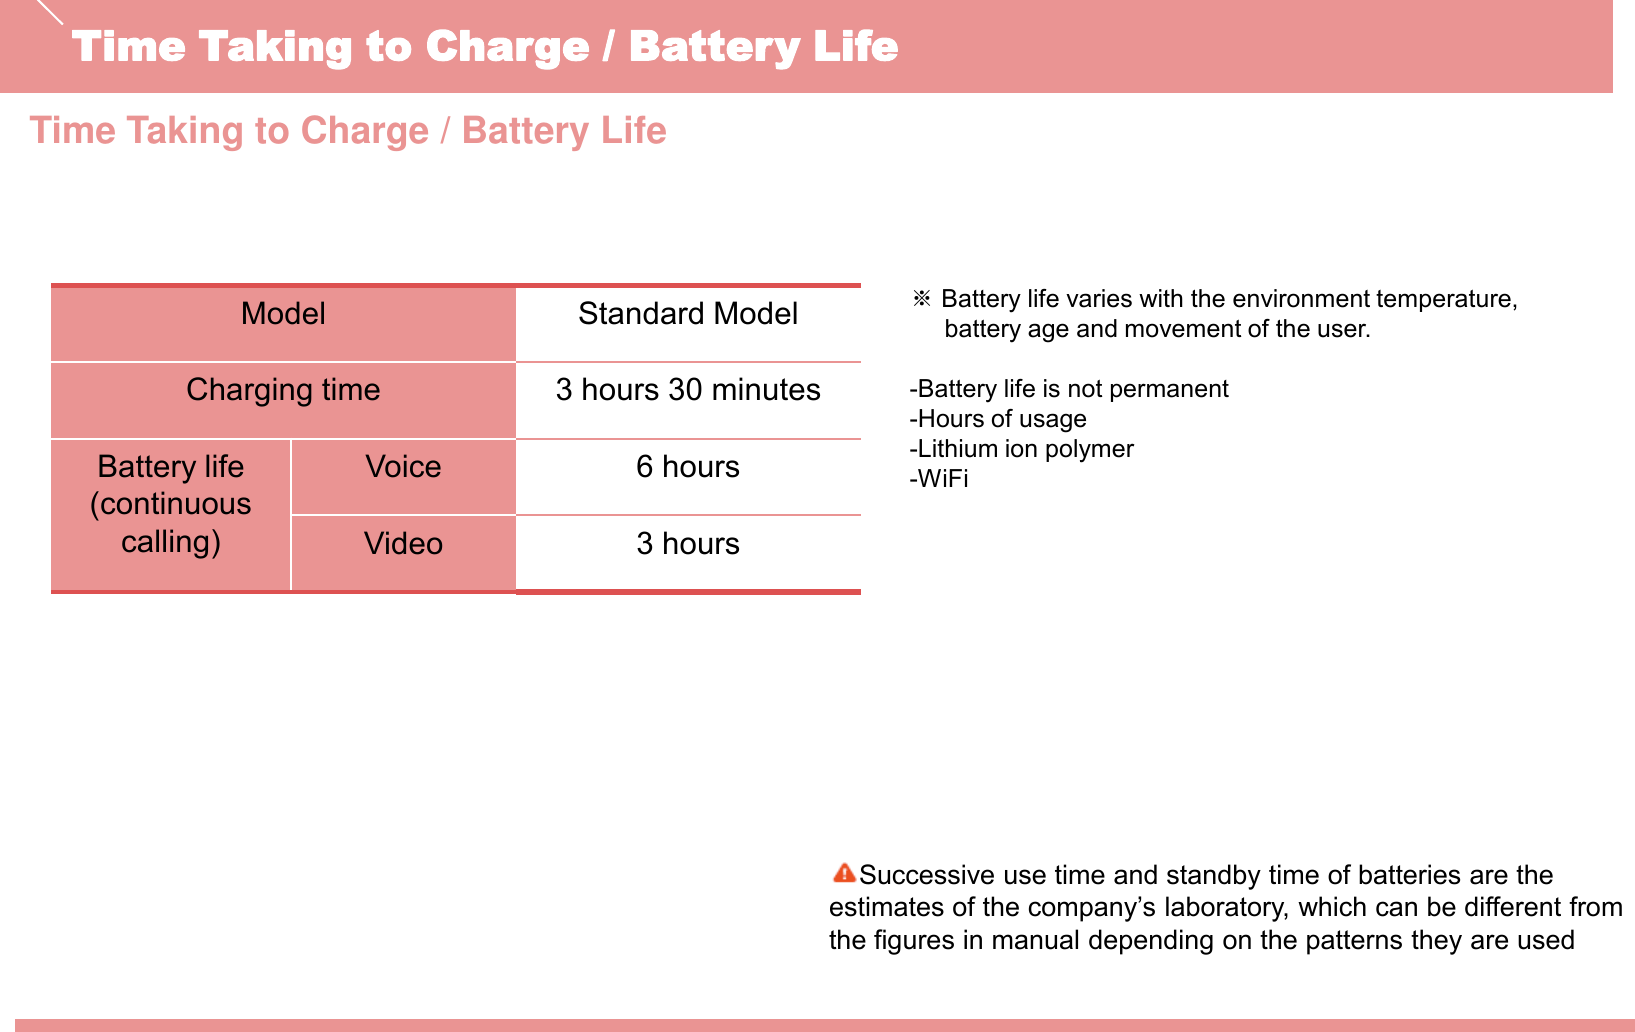 Time Taking to Charge / Battery Life※Battery life varies with the environment temperature, battery age and movement of the user. -Battery life is not permanent-Hours of usage-Lithium ion polymer-WiFiModel Standard ModelCharging time 3 hours 30 minutesBattery life (continuous calling)Voice 6 hoursVideo 3 hoursTime Taking to Charge / Battery LifeSuccessive use time and standby time of batteries are the estimates of the company‟s laboratory, which can be different from the figures in manual depending on the patterns they are used